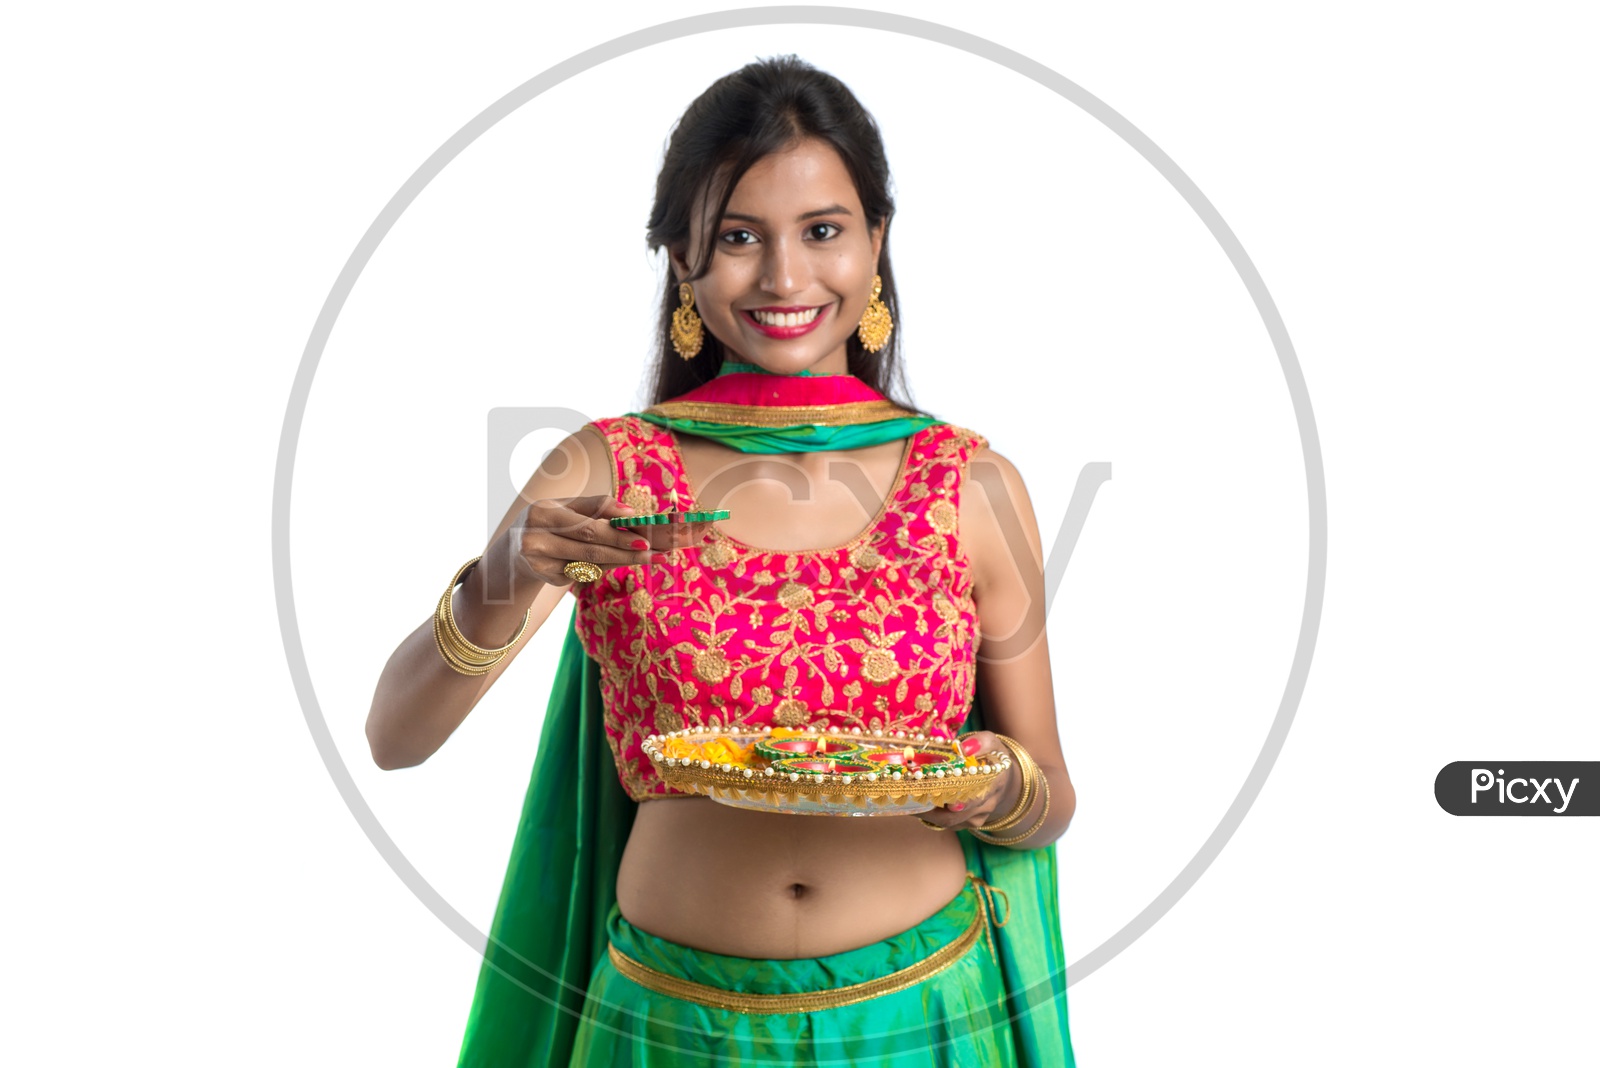 Portrait Of a Young Traditional Indian Girl Holding Dia  Plate in Hand  over an Isolated White Background